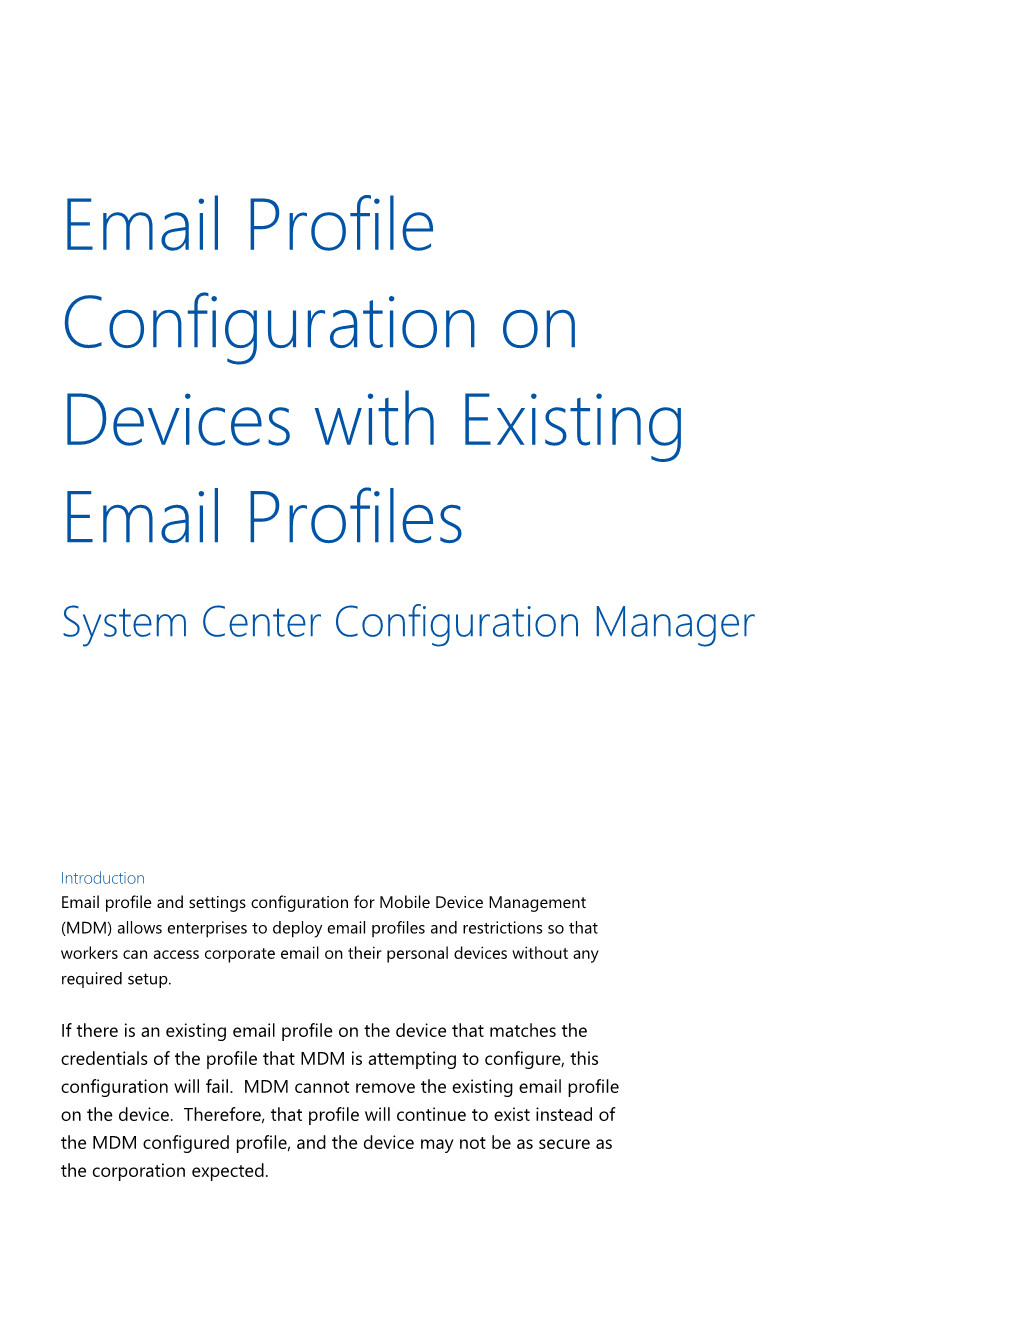 Email Profile Configuration on Devices with Existing Email Profiles